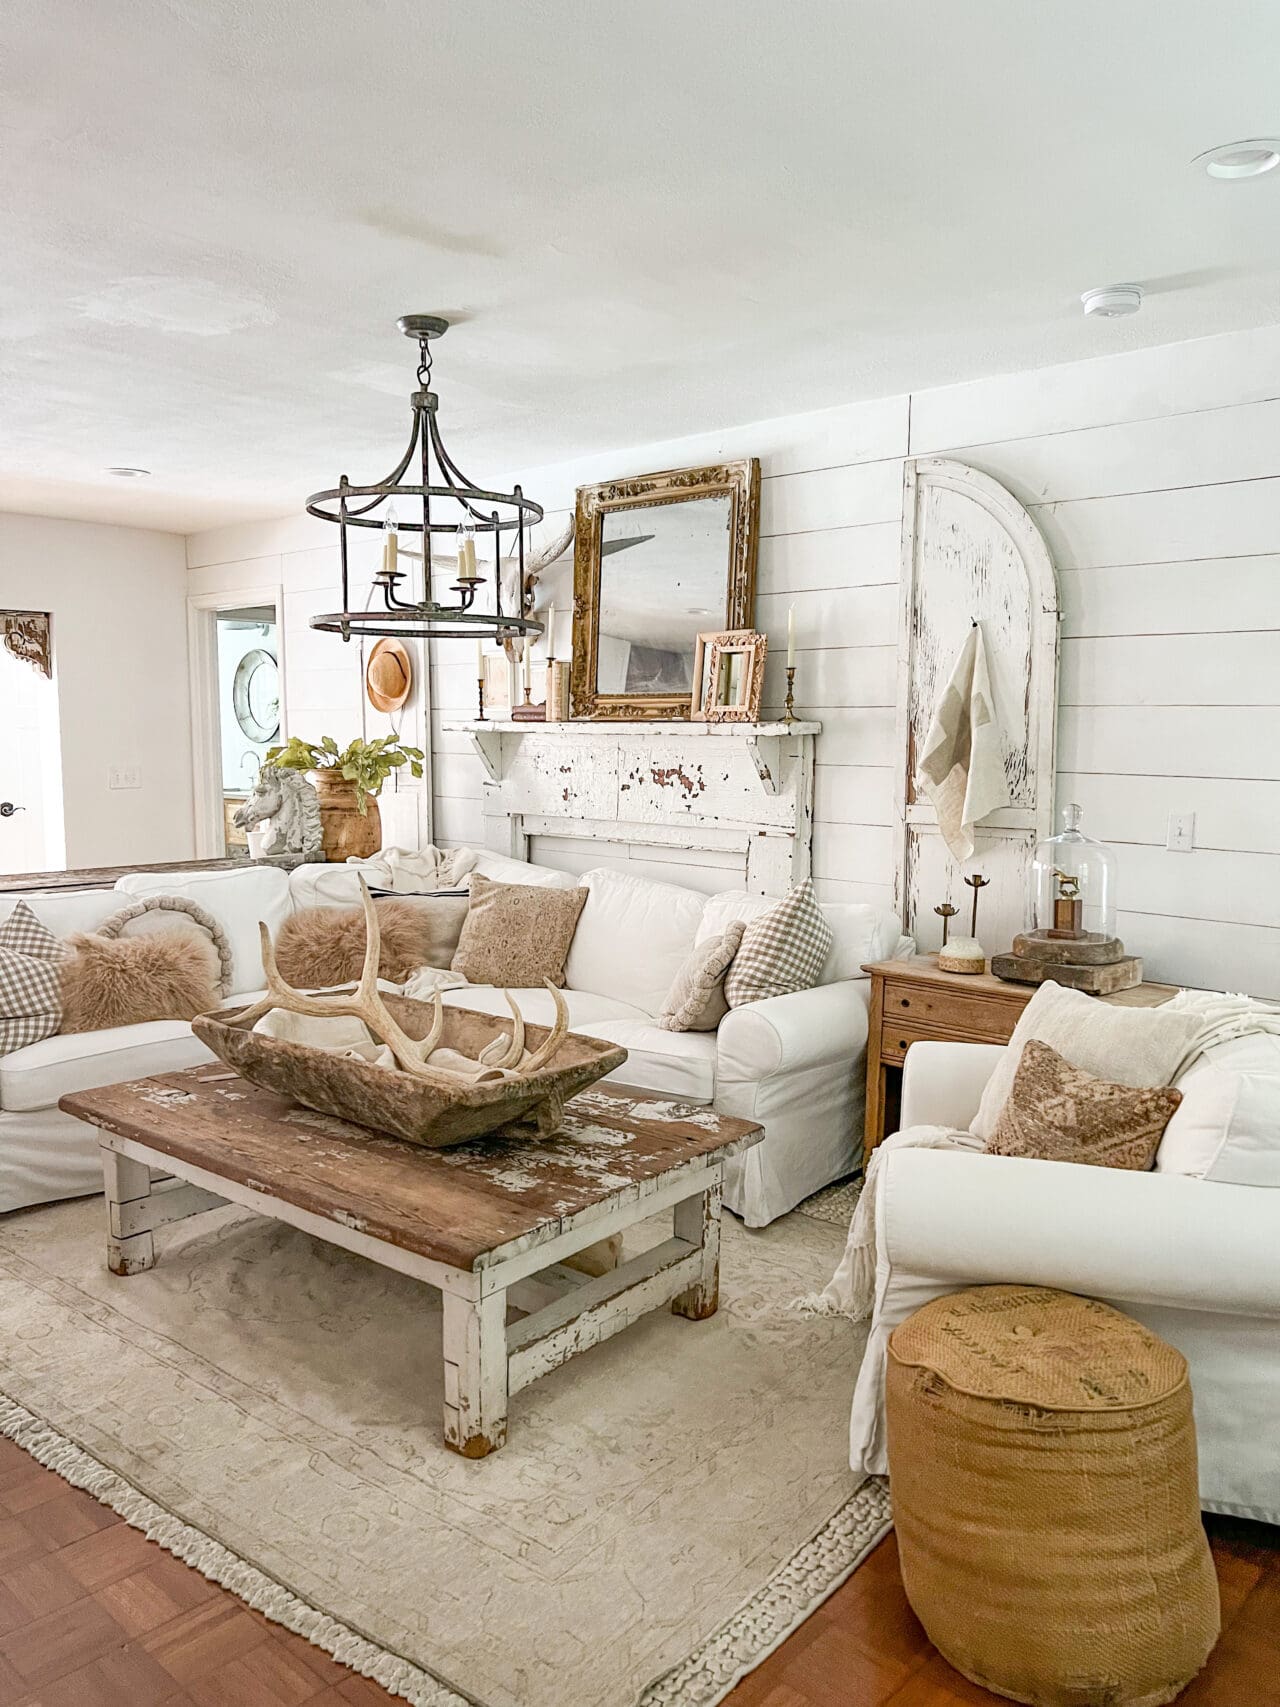 Design Ideas to Create a Rustic Neutral Living Room for Fall - Robyn's ...